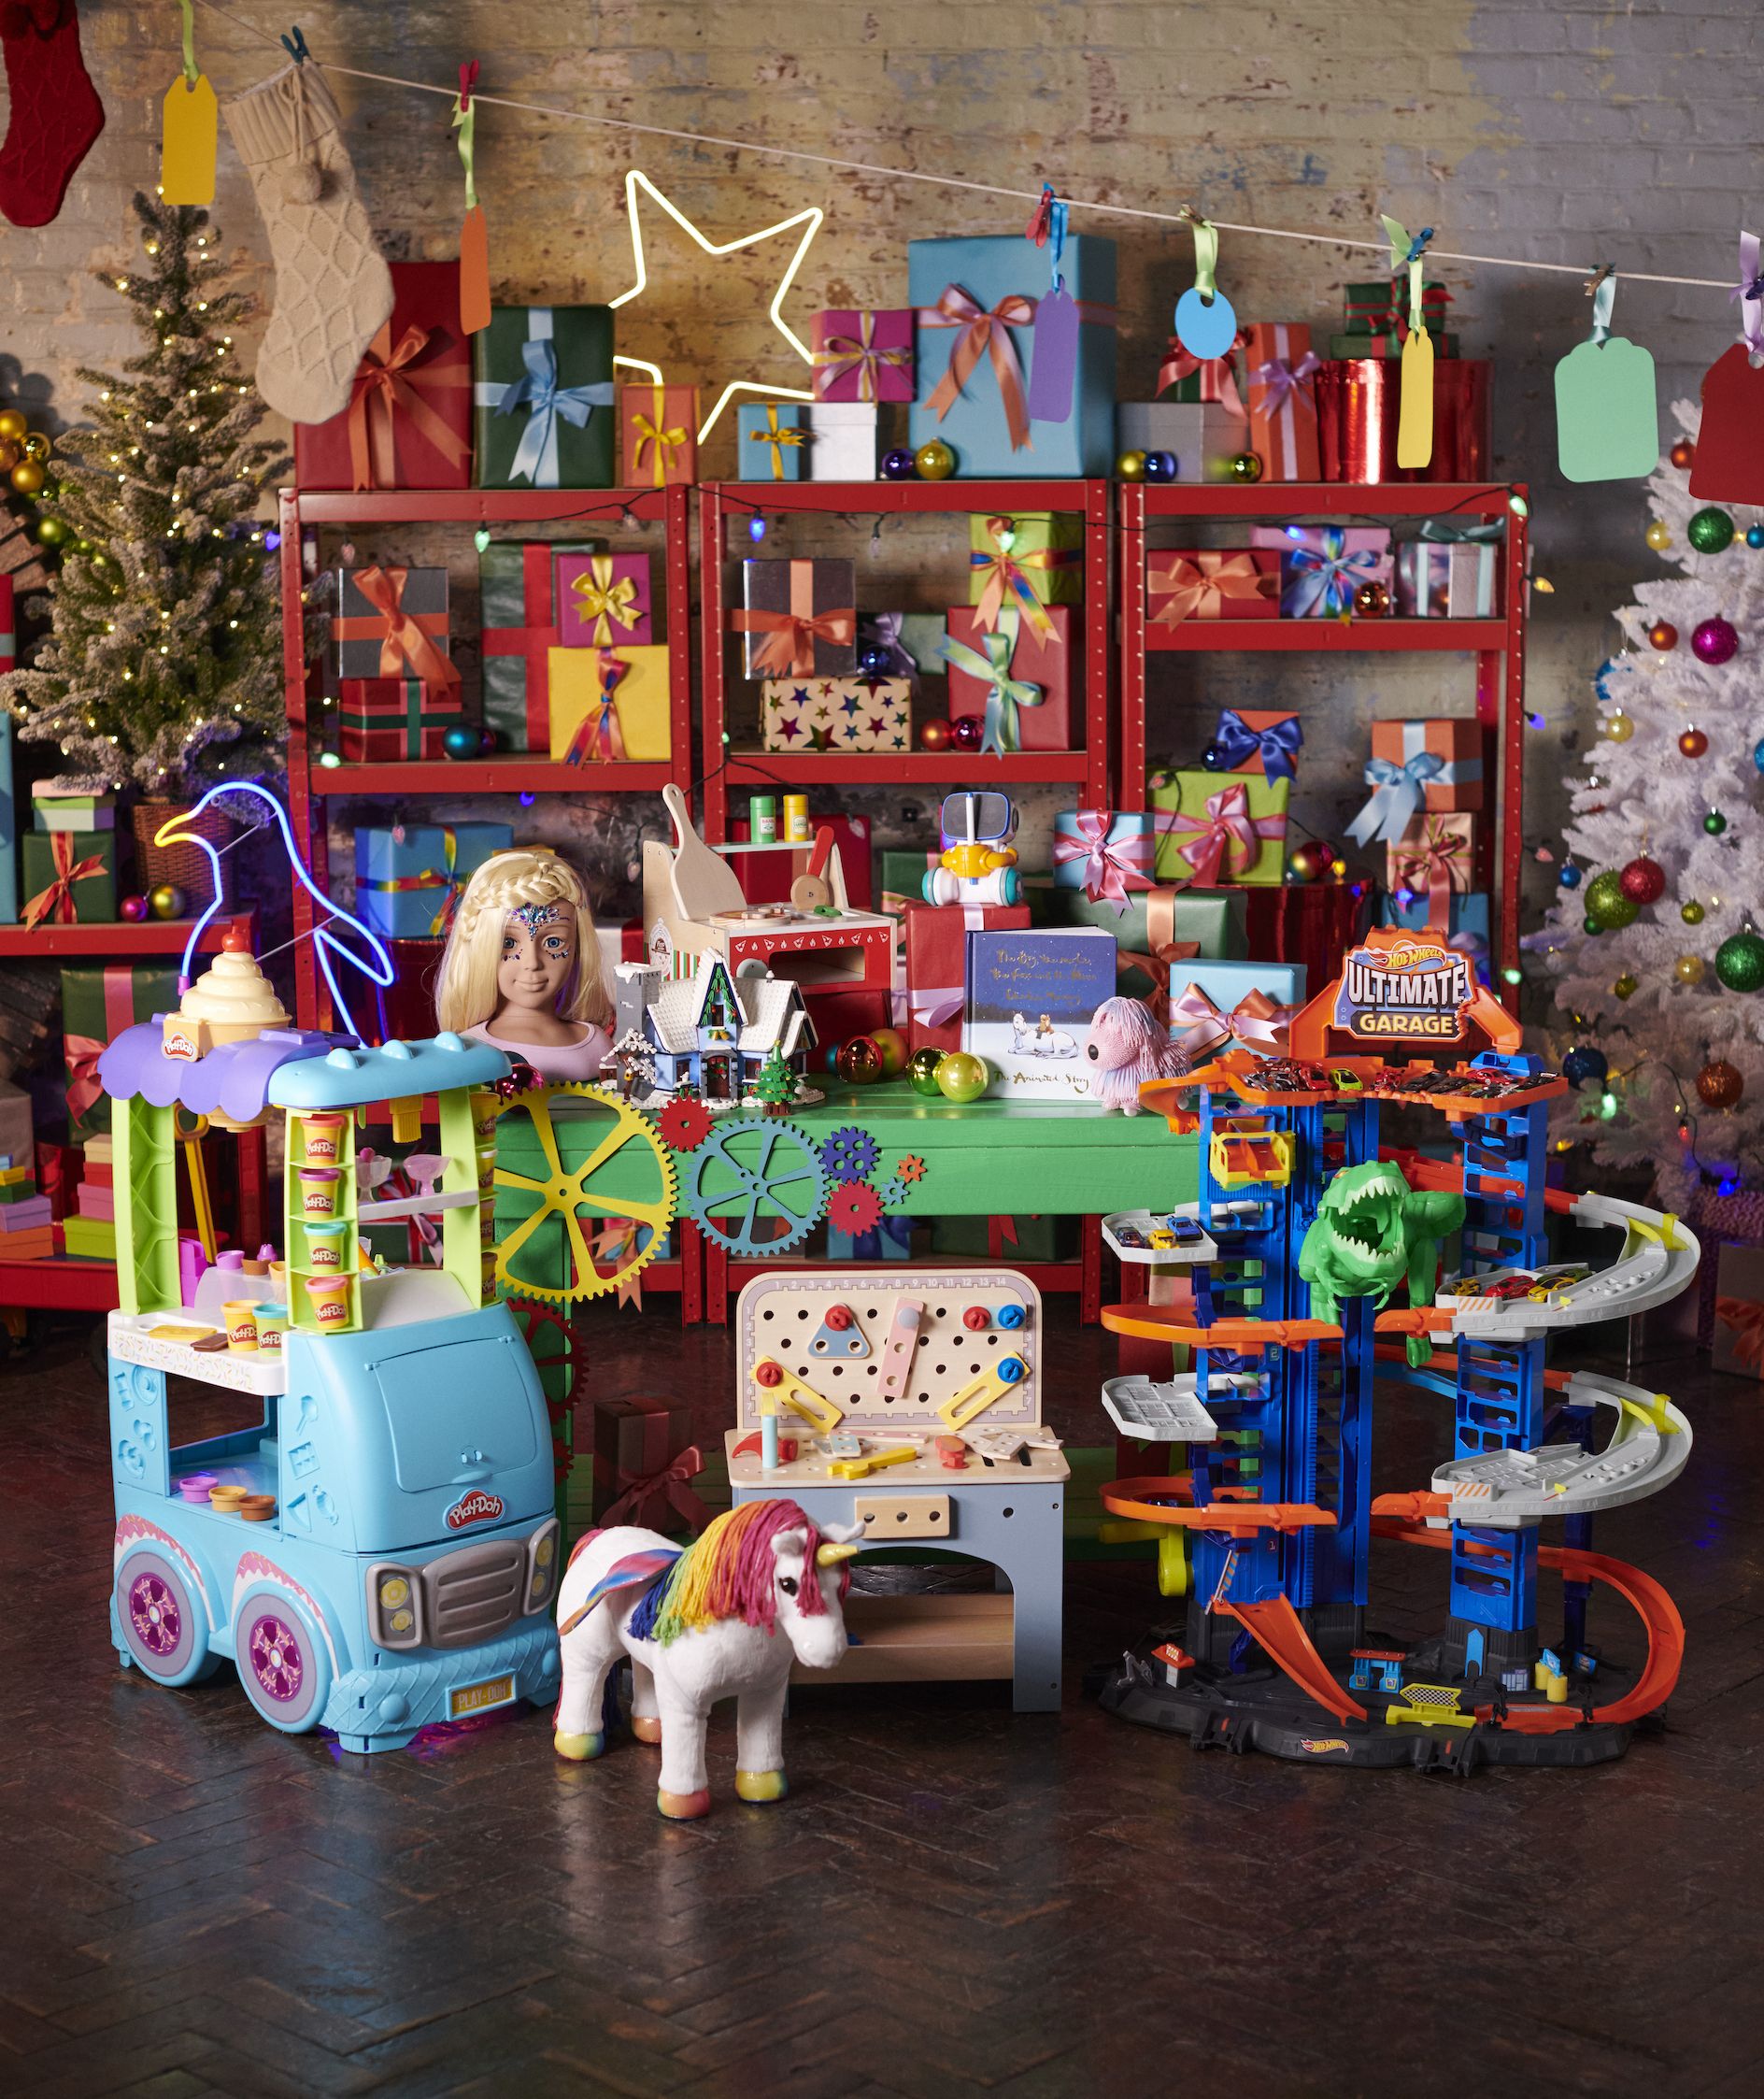 The 32 hottest toys to gift for Christmas 2022, per experts